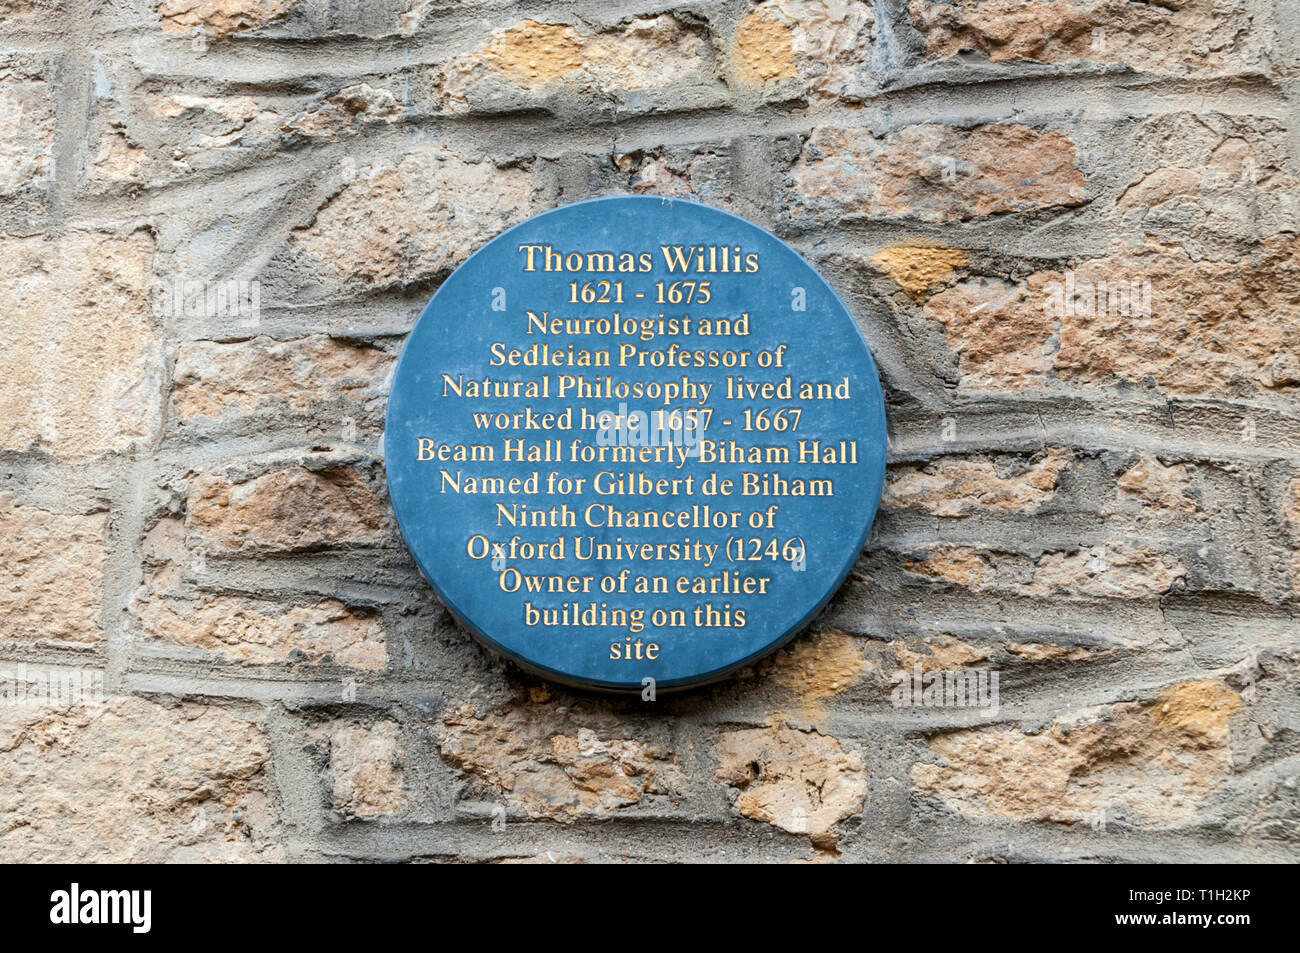 A plaque in Merton Street, Oxford, marks the site where Thomas Willis, the 17th century neurologist, lived and worked. Stock Photo